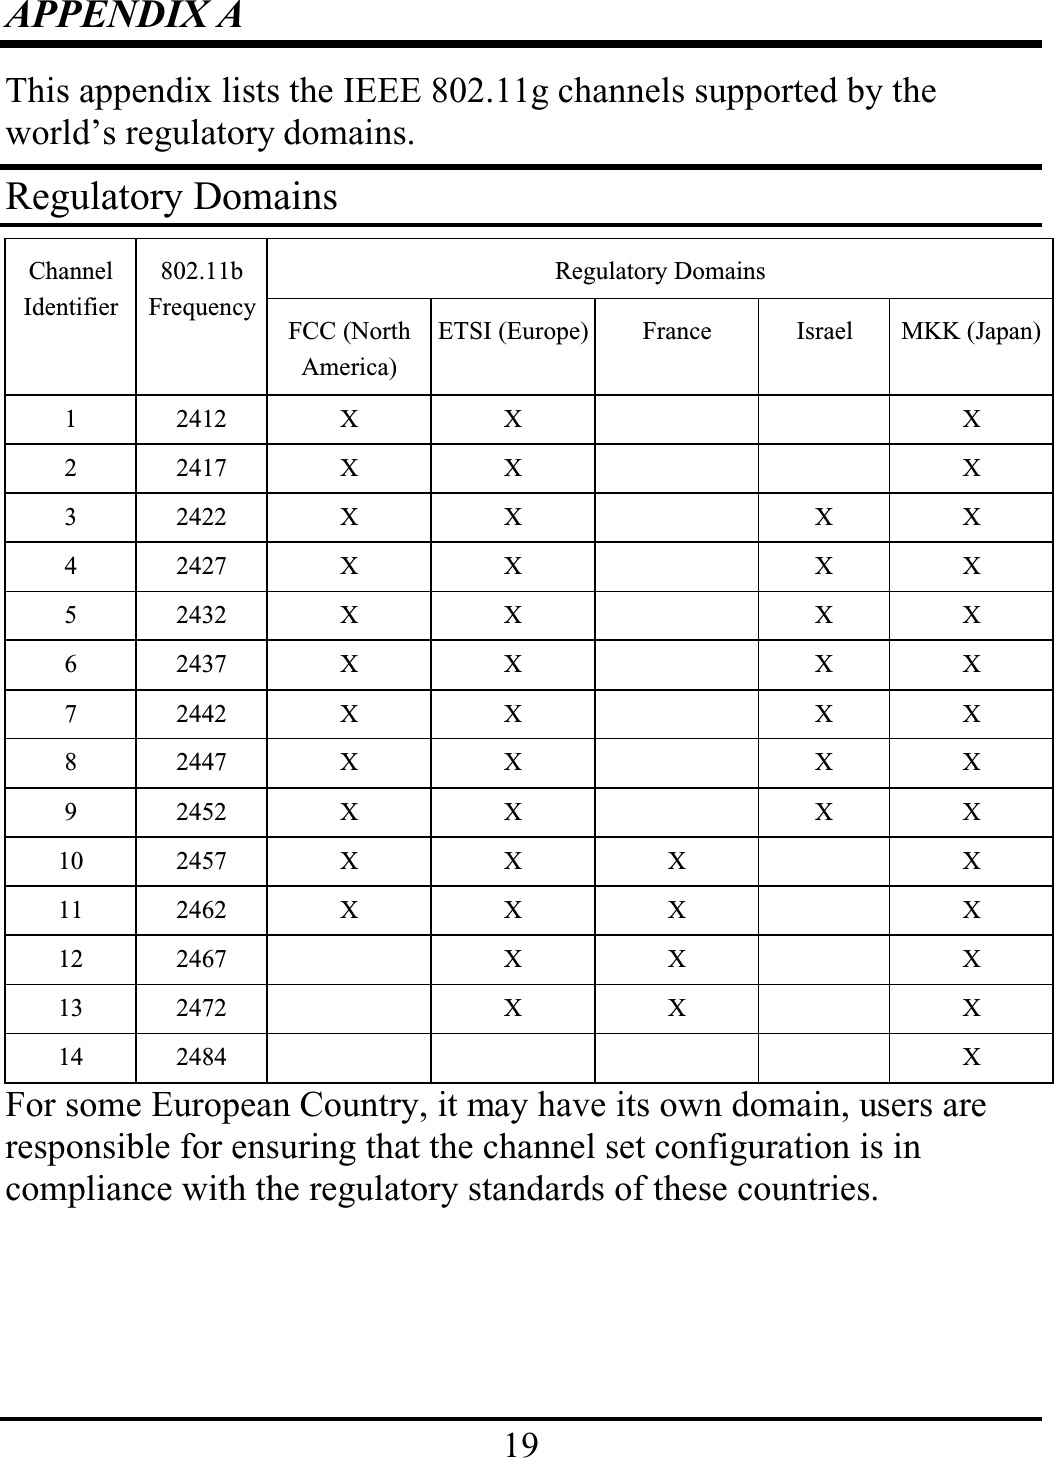 19APPENDIX AThis appendix lists the IEEE 802.11g channels supported by the world’s regulatory domains.Regulatory DomainsRegulatory DomainsChannelIdentifier802.11bFrequencyFCC (NorthAmerica)ETSI (Europe) France Israel MKK (Japan)1 2412 X X X2 2417 X X X3 2422 X X X X4 2427 X X X X5 2432 X X X X6 2437 X X X X7 2442 X X X X8 2447 X X X X9 2452 X X X X10 2457 X X X X11 2462 X X X X12 2467 X X X13 2472 X X X14 2484 XFor some European Country, it may have its own domain, users are responsible for ensuring that the channel set configuration is in compliance with the regulatory standards of these countries.